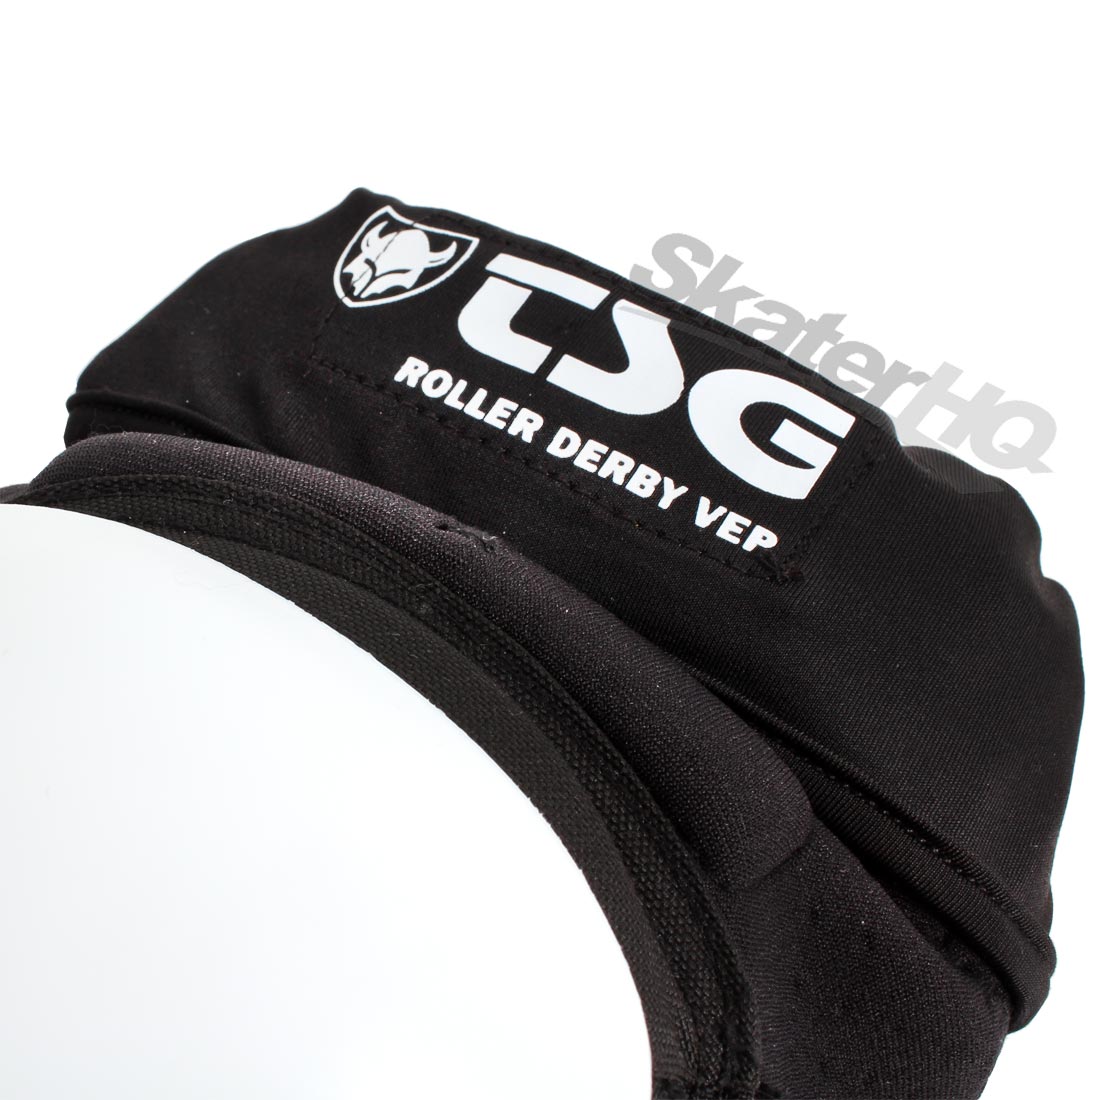 TSG D30 Rollerderby Knee - Large Protective Gear